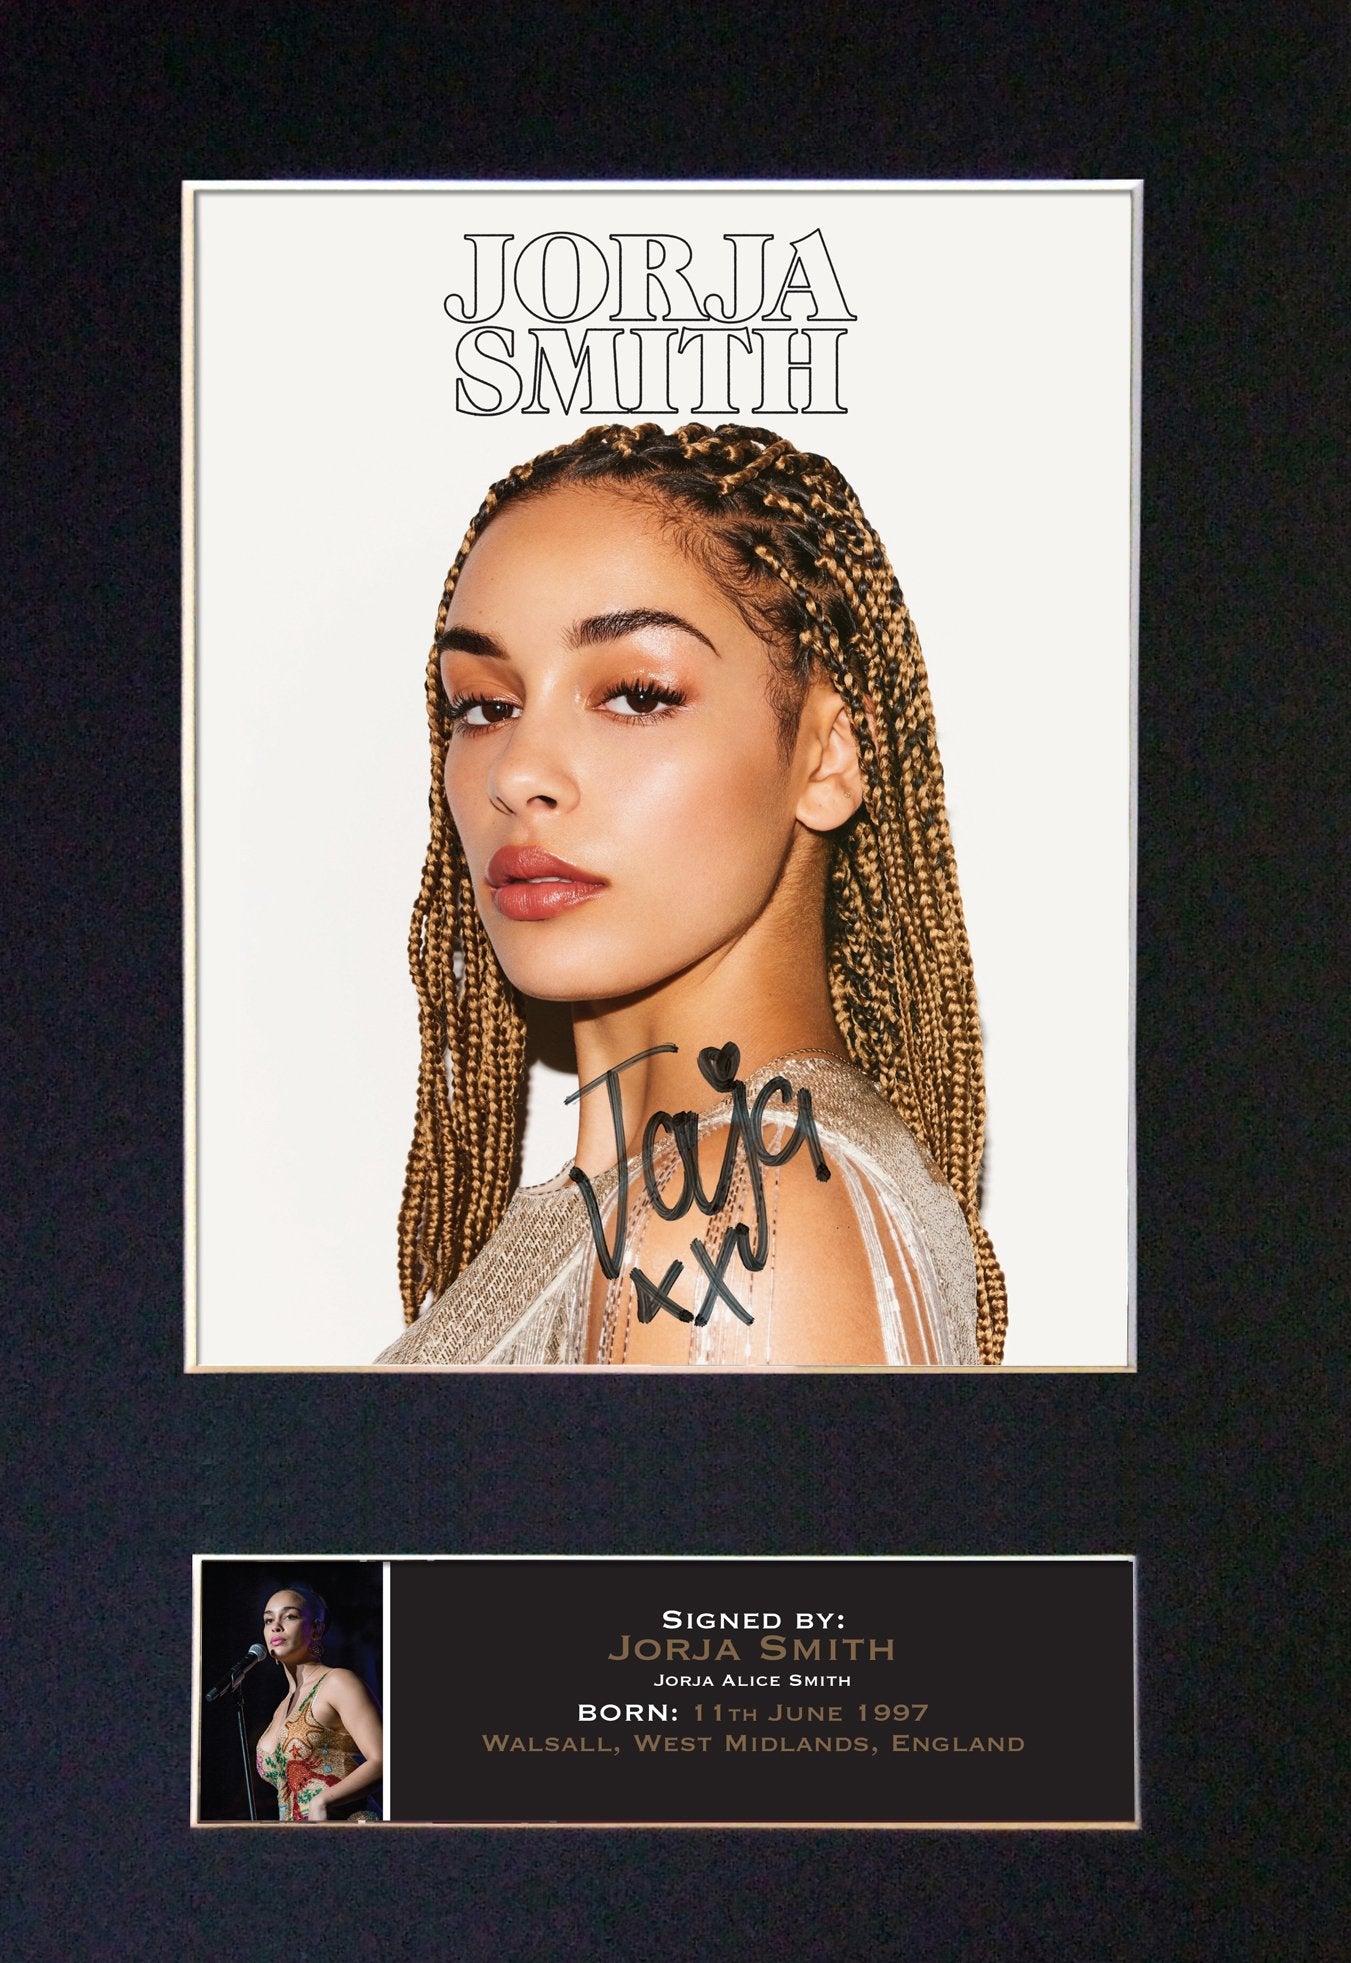 JORJA SMITH Signed Autograph Quality Mounted Photo Repro A4 Print 778